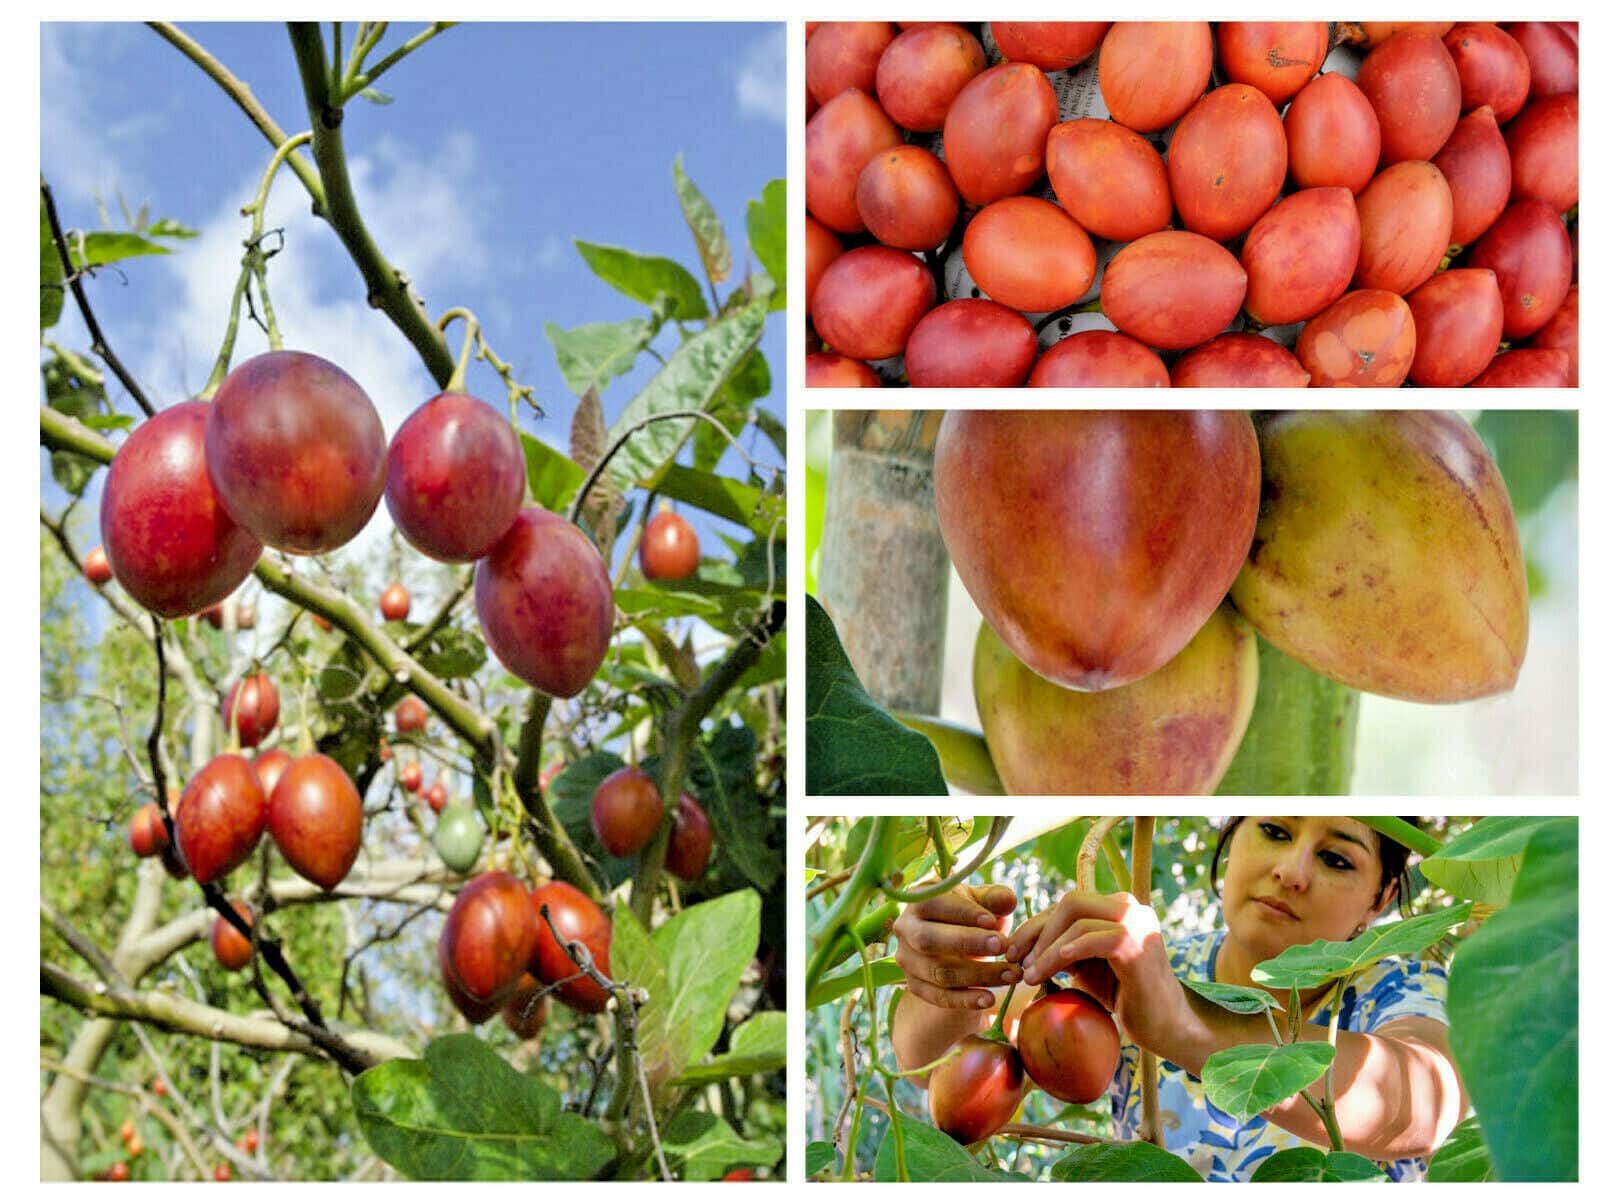 RED TAMARILLO SEEDS Solanum betaceum 'Red' 20 Tree Tomato Edible Fast Growing 